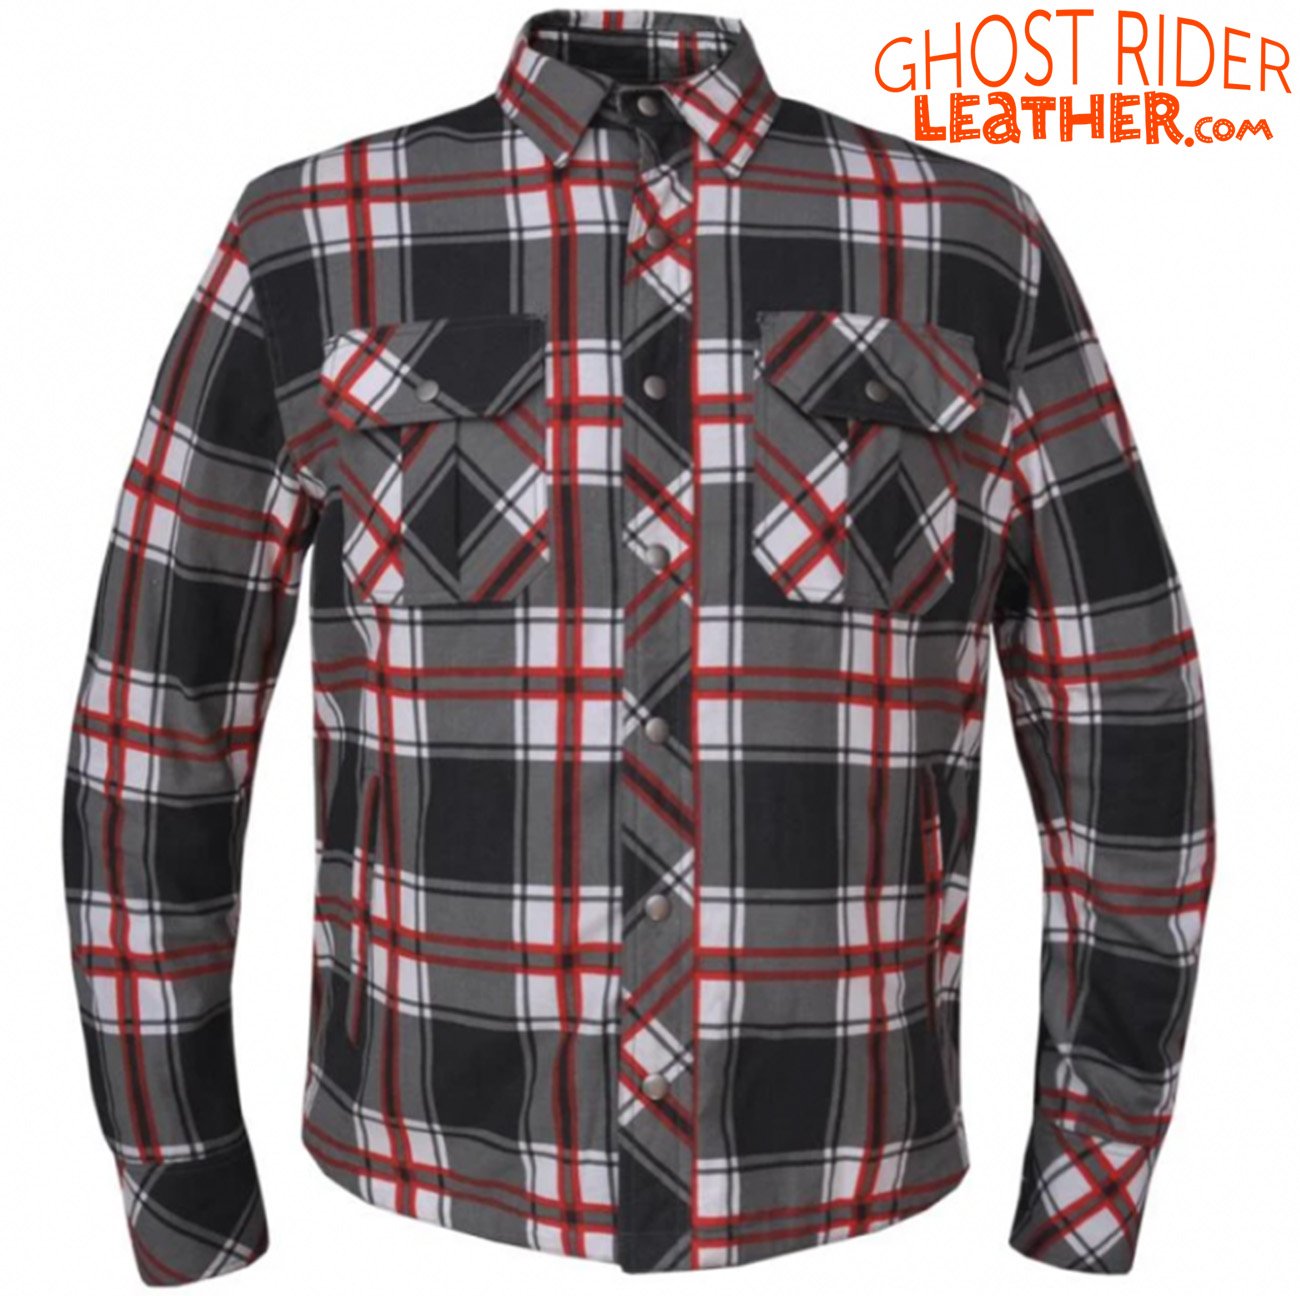 Flannel Motorcycle Shirt - Men's - Armor - Up To Size 8XL - Red White Black Plaid - TW136-01-UN